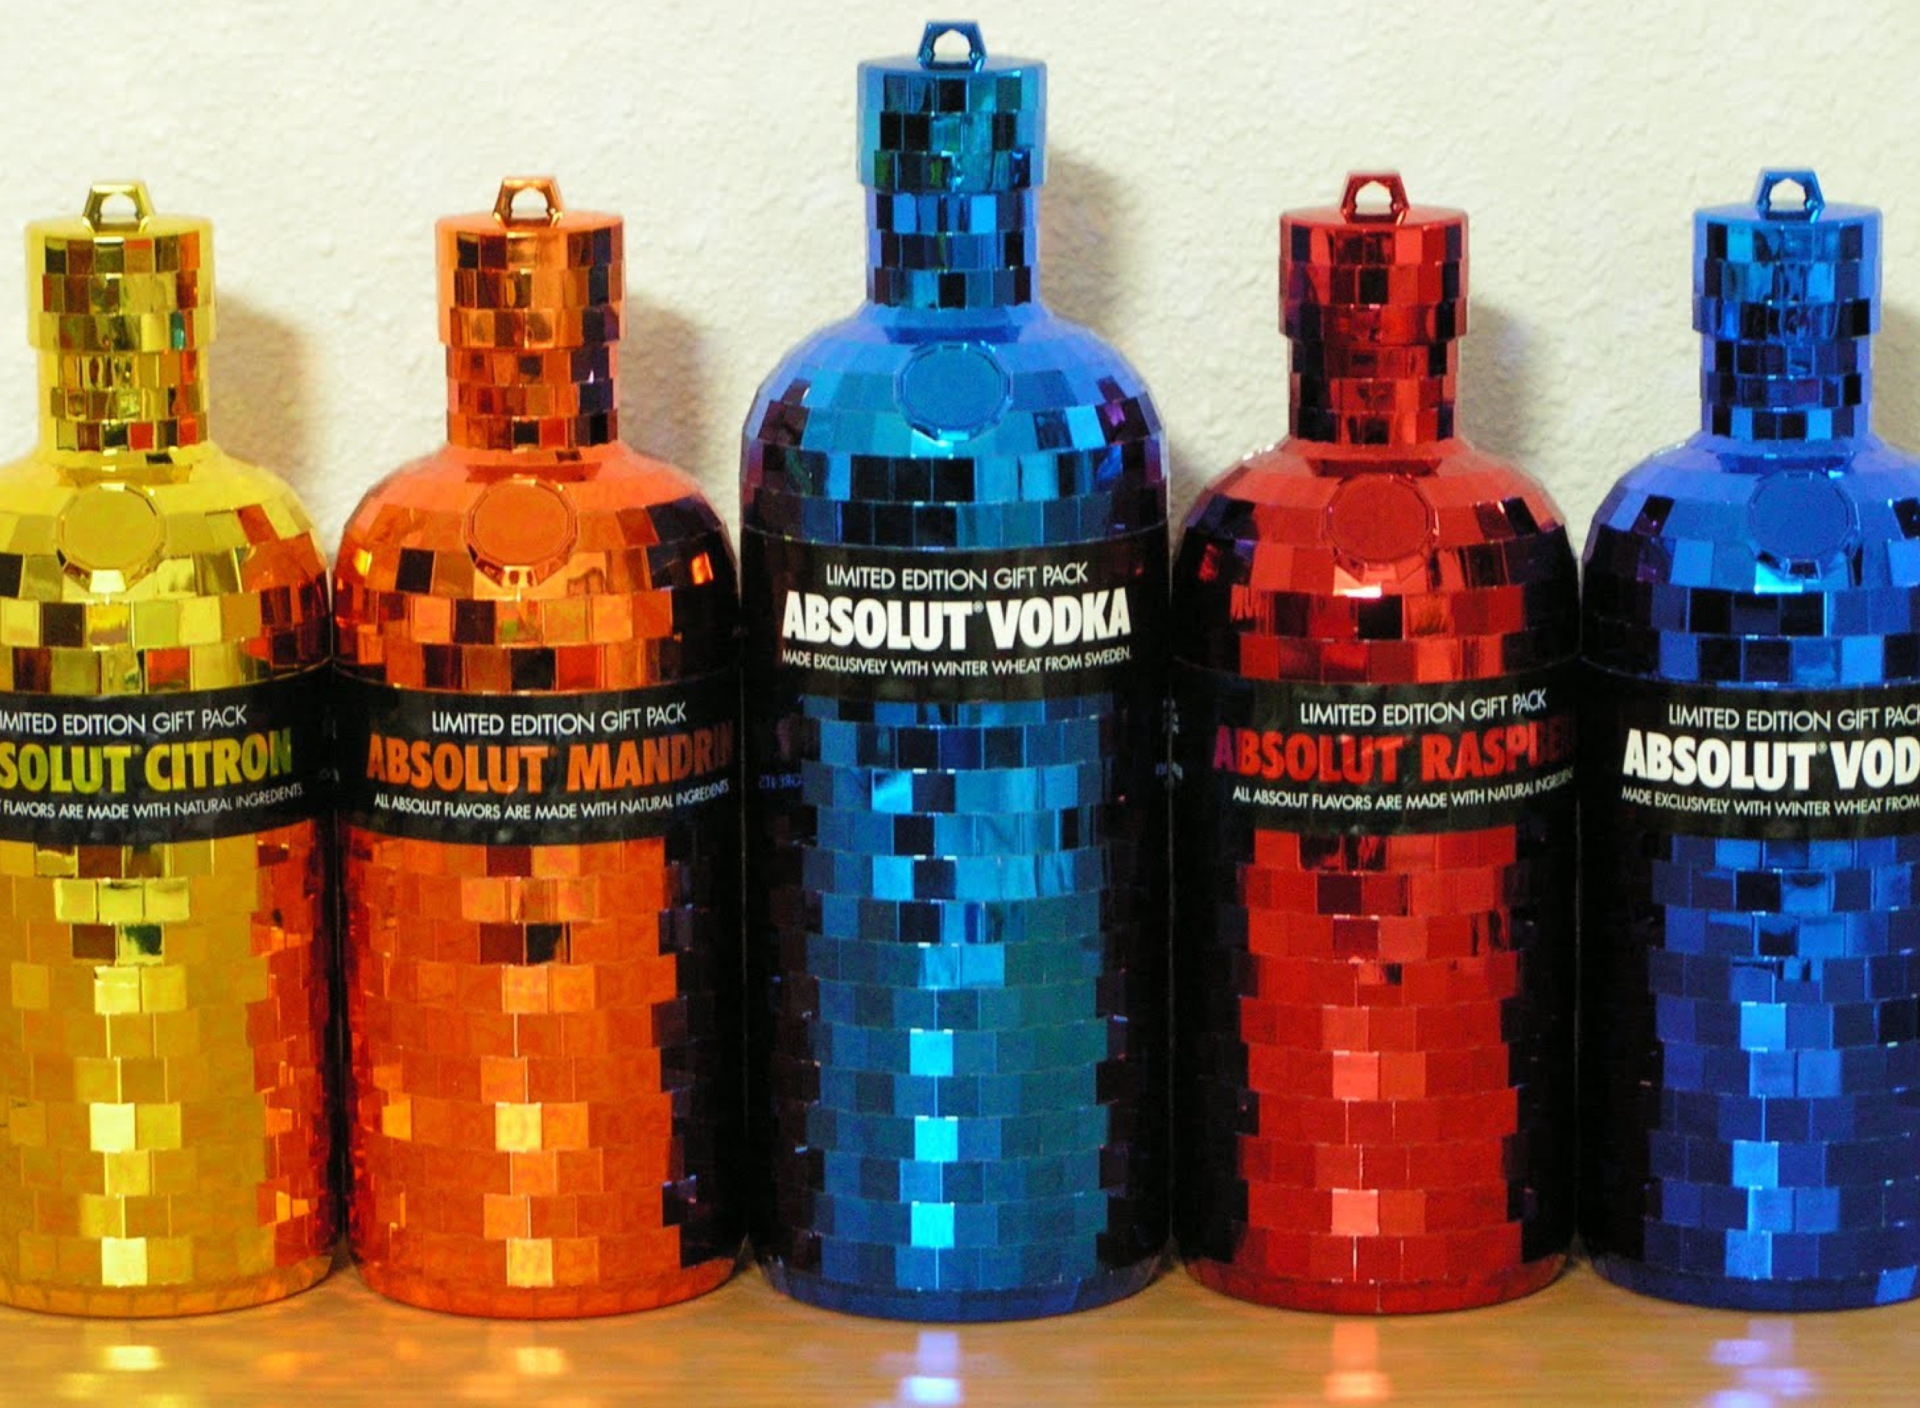 Absolut Vodka Limited Edition wallpaper 1920x1408